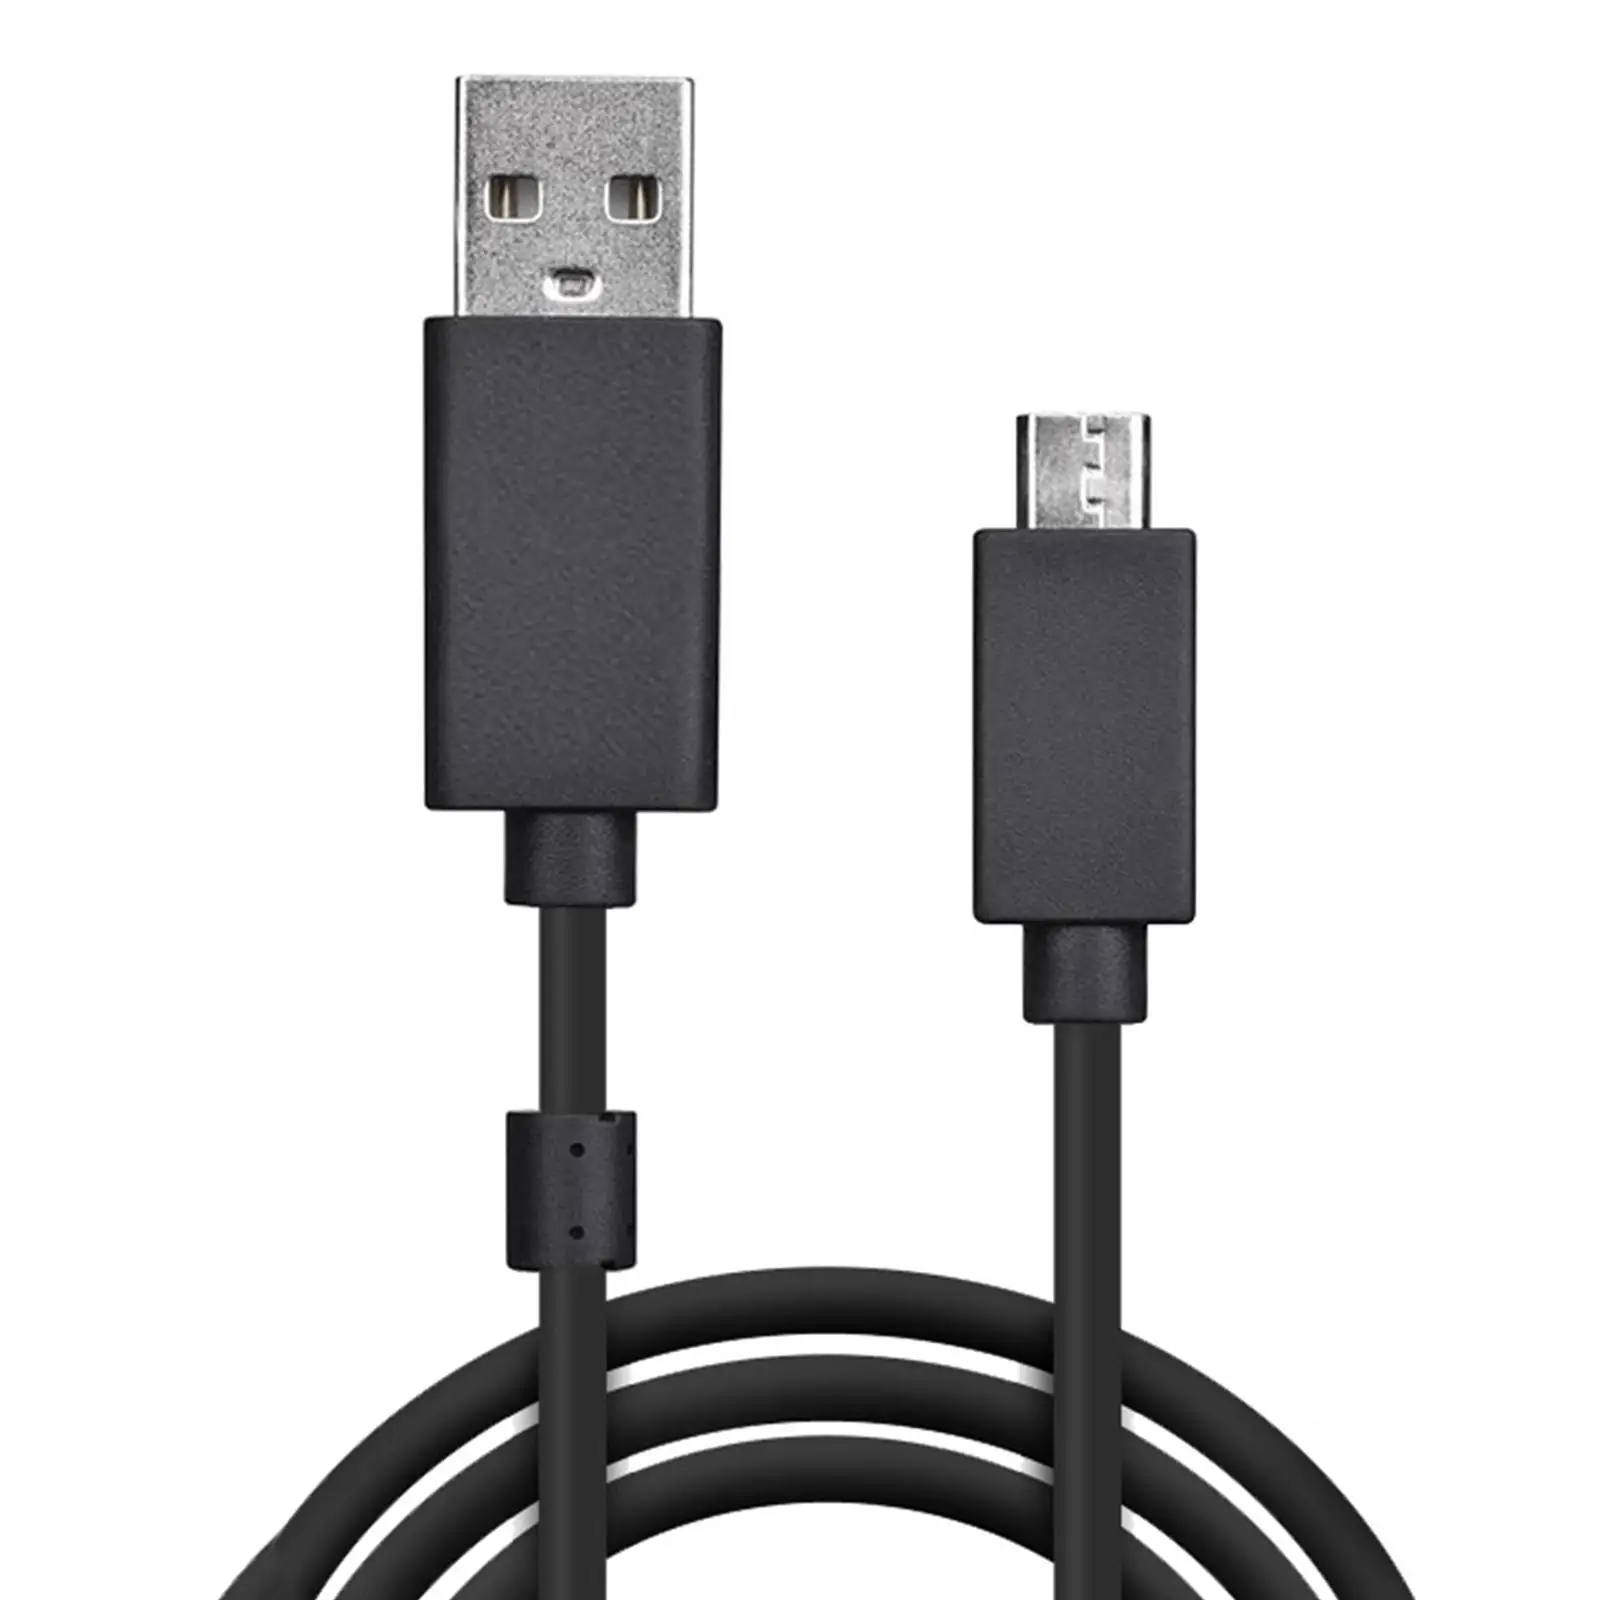 Replacement USB Charging Cable, Extension Cord 2M 6.56 633 G6332